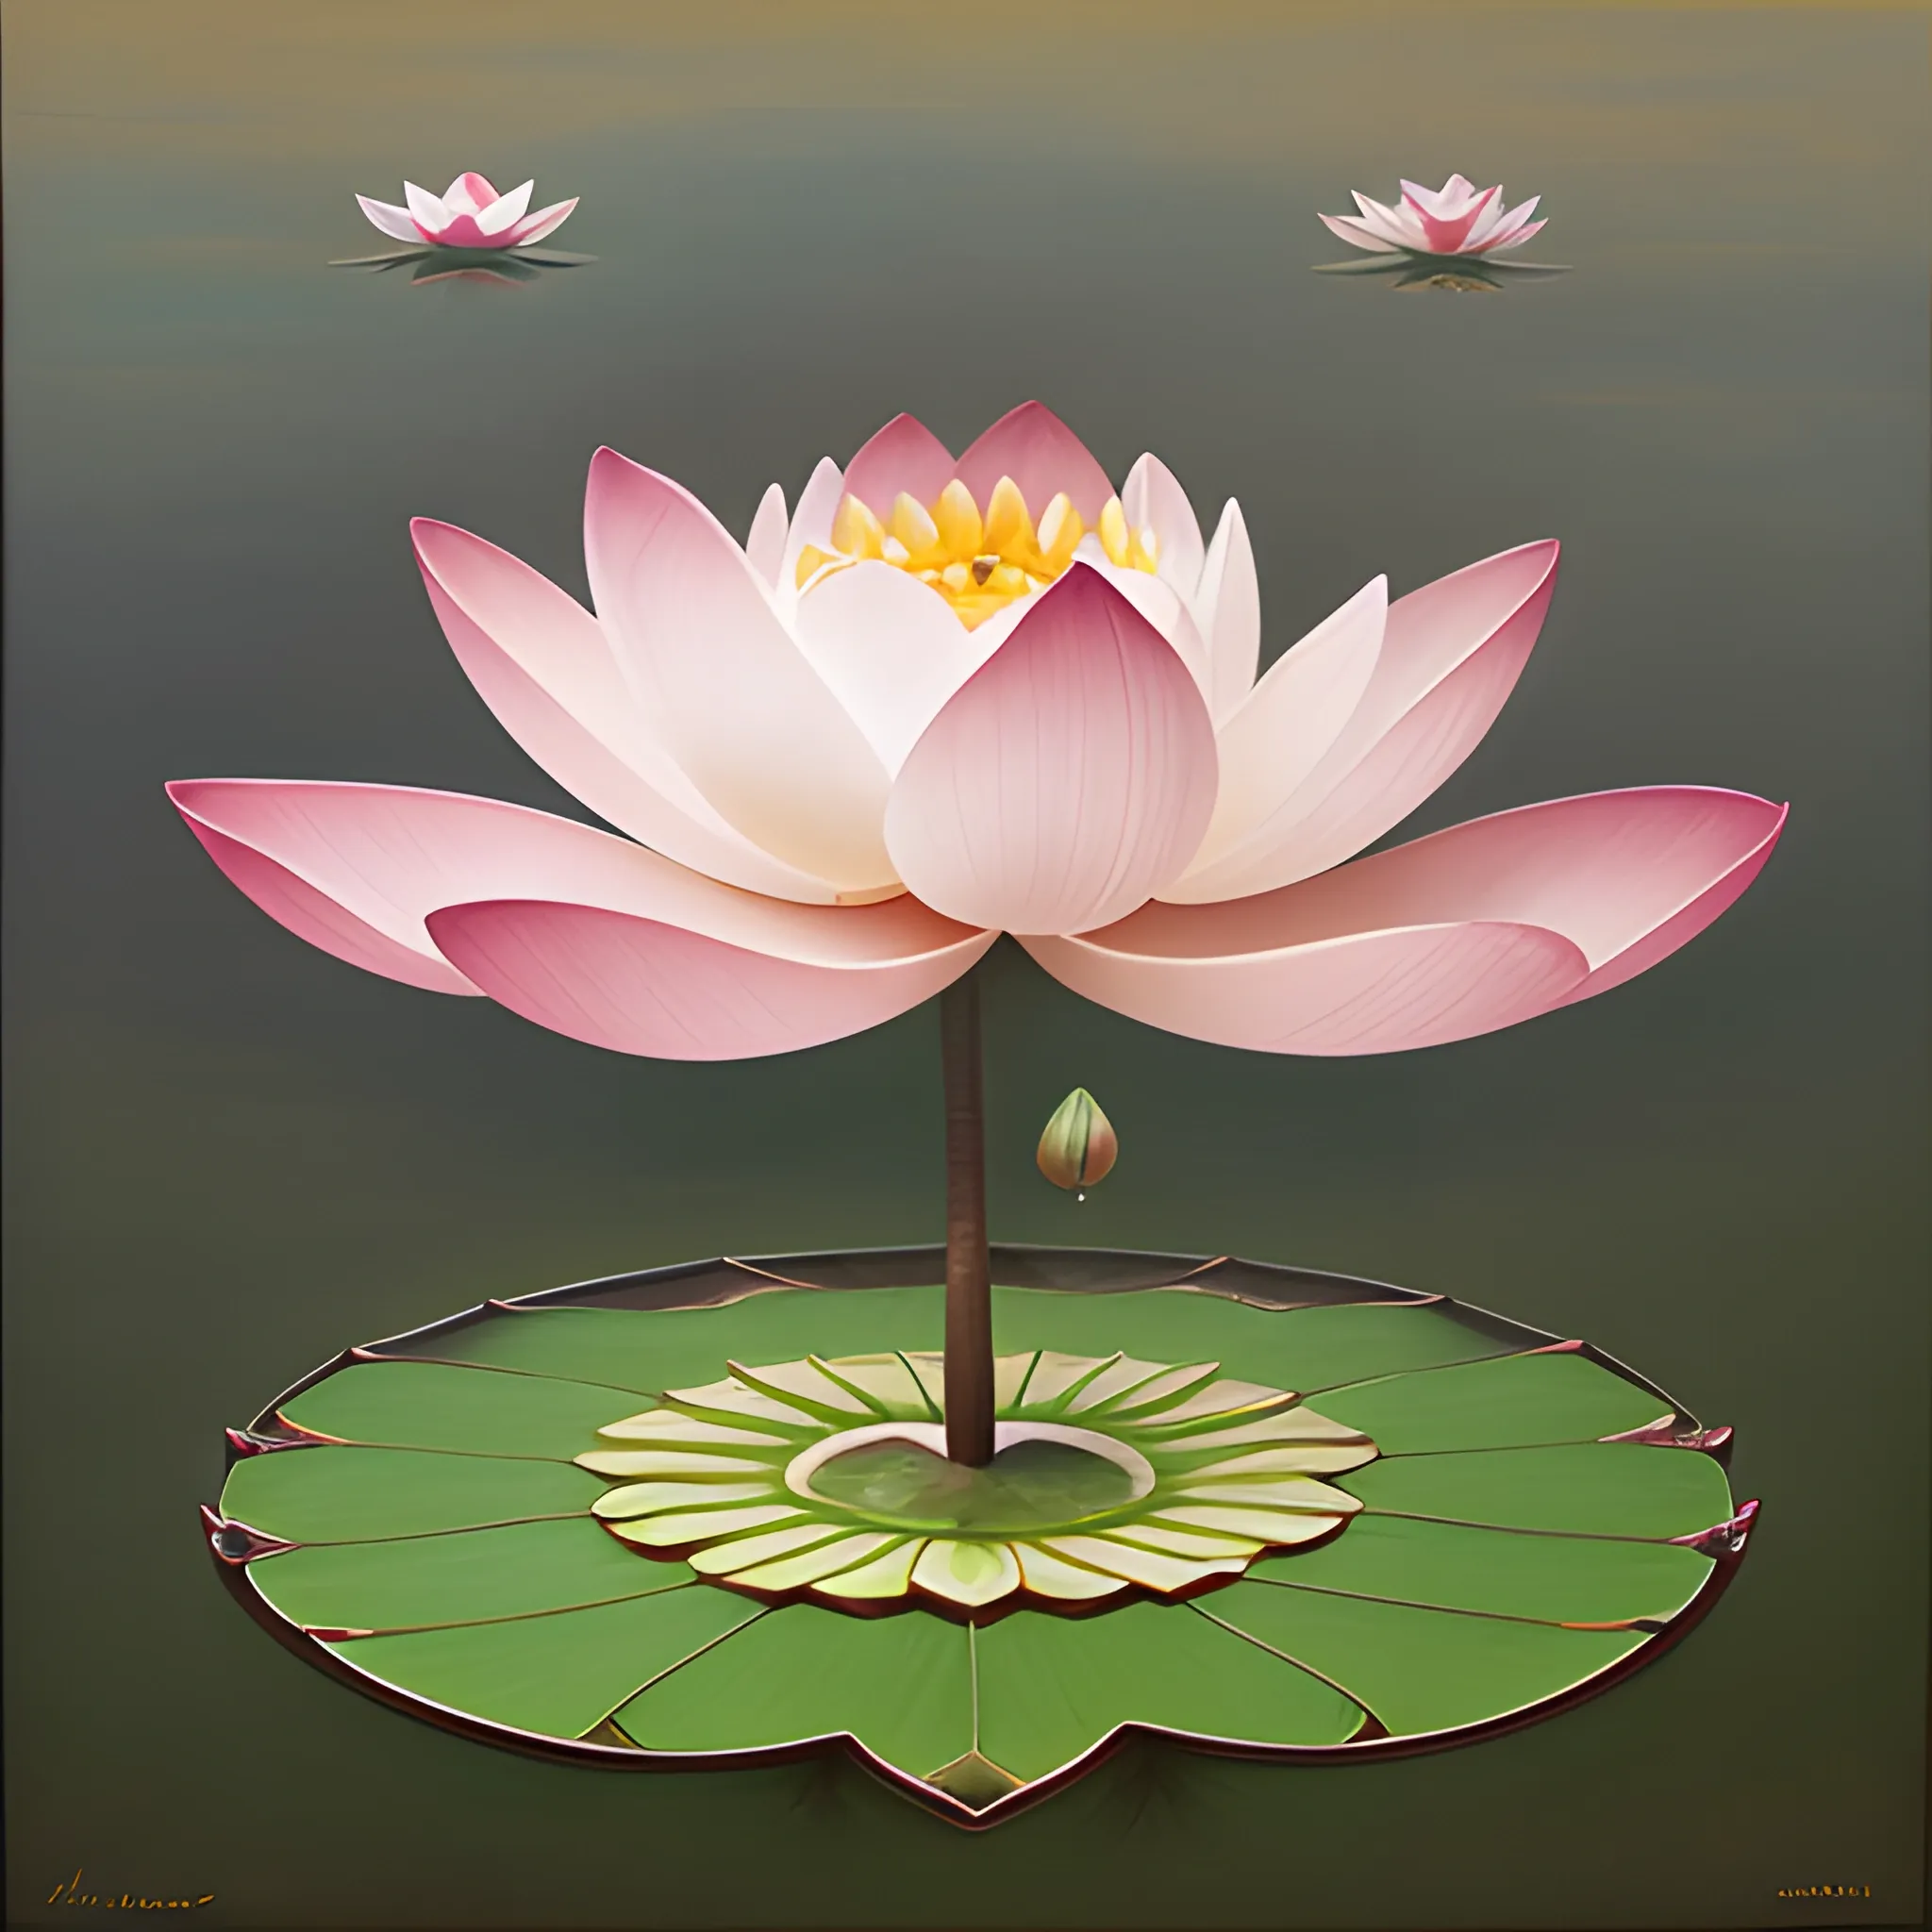 a beautiful lotus flower inspired by the symbol of the lotus flower bringing joy to life and balance, cinematic, inspired by arcadia, the lotus is the most beautiful flower, whose petals open one by one. But it only grow in mud. in order to grow and gain wisdom,  meaning the purity of mind. 


, Oil Painting inspired by the painter salvator dali